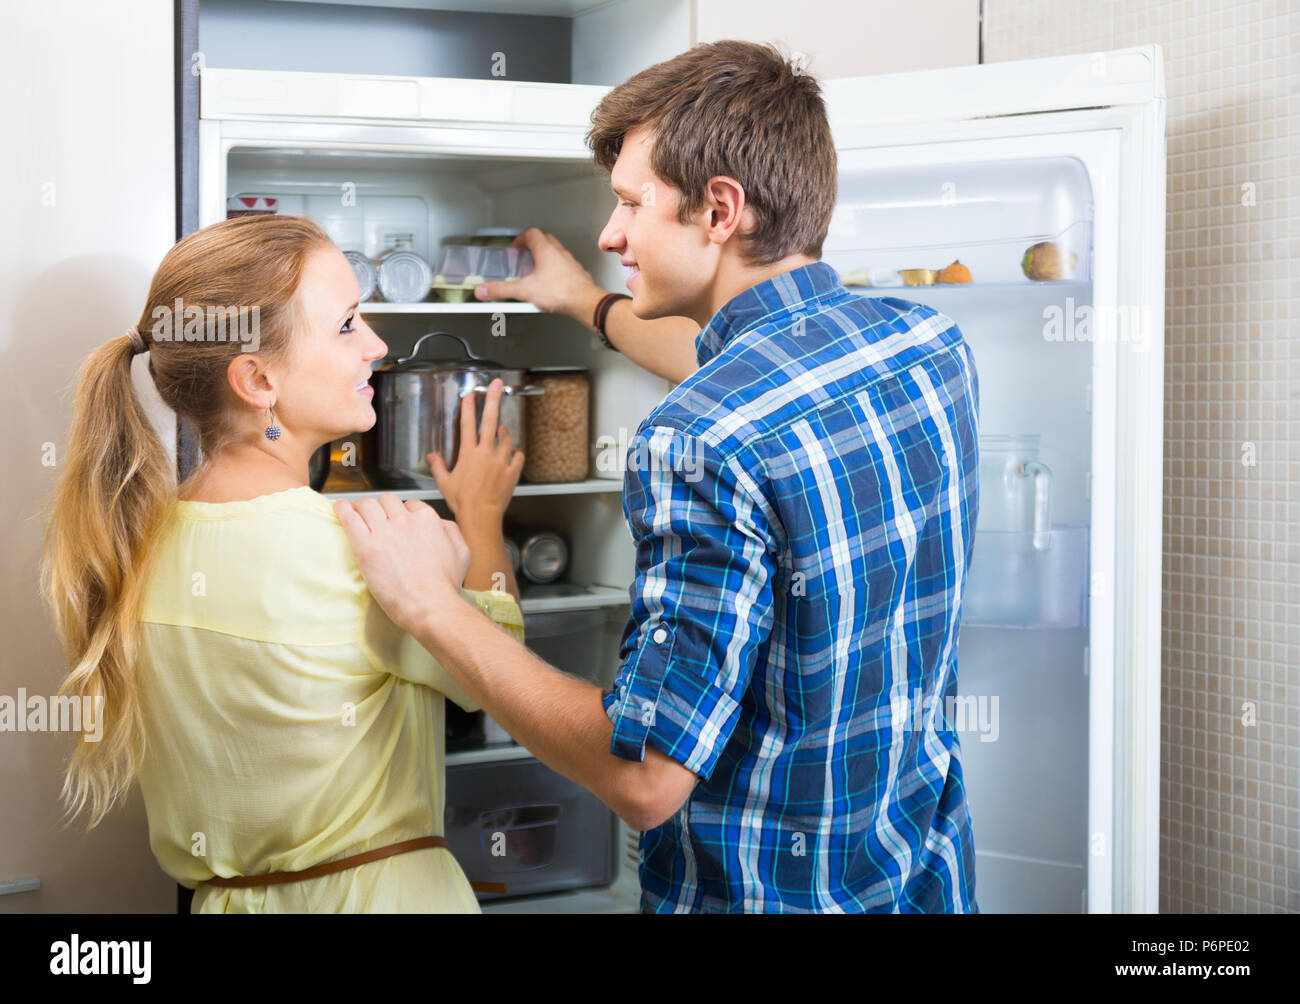 https://c8.alamy.com/comp/P6PE02/smiling-young-man-and-woman-standing-near-fridge-in-kitchen-P6PE02.jpg